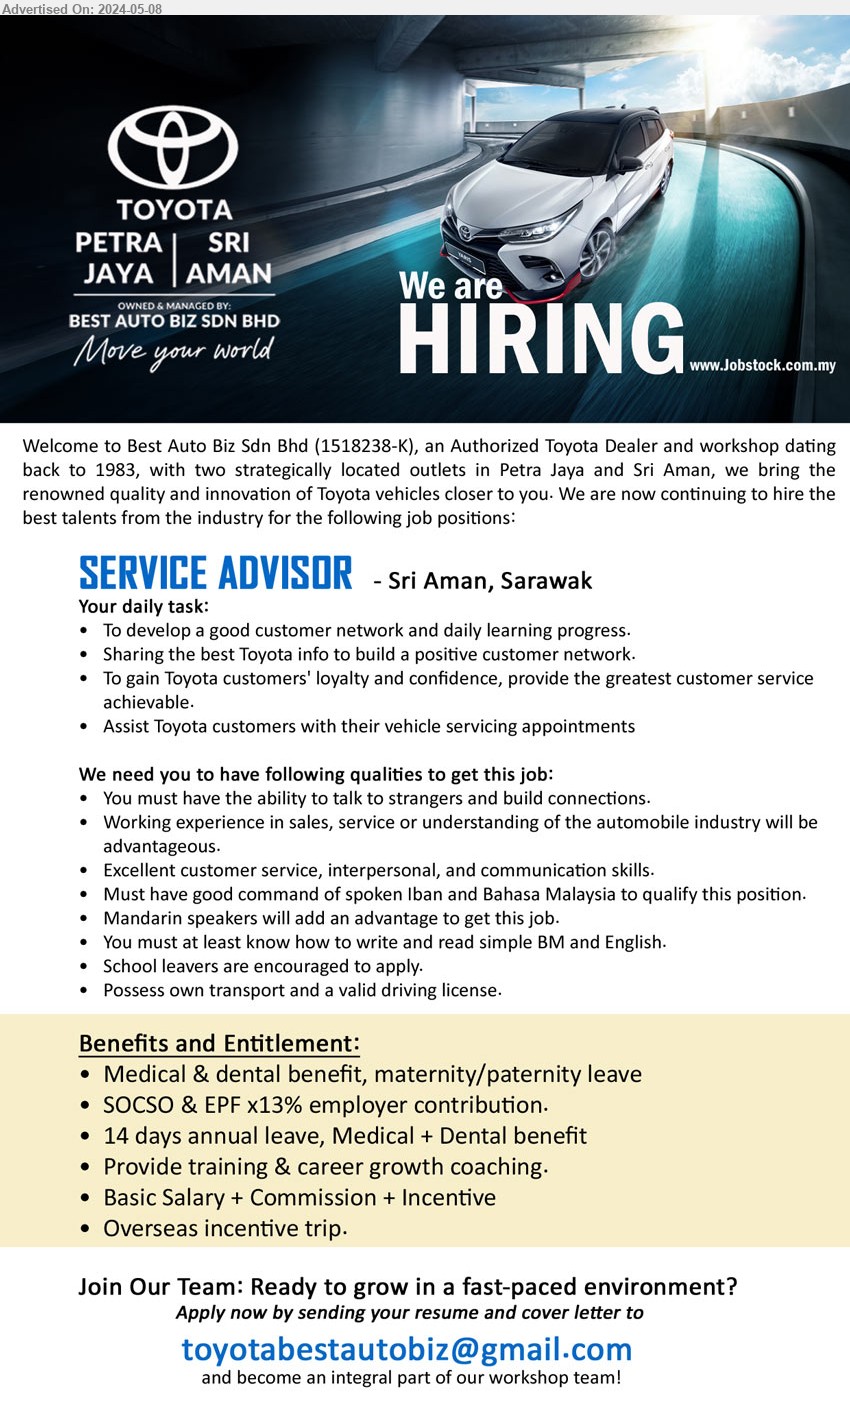 BEST AUTO BIZ SDN BHD - SERVICE ADVISOR (Sri Aman), You must have the ability to talk to strangers and build connections, Working experience in sales, service or understanding of the automobile industry will be advantageous.,...
Email resume to ...
